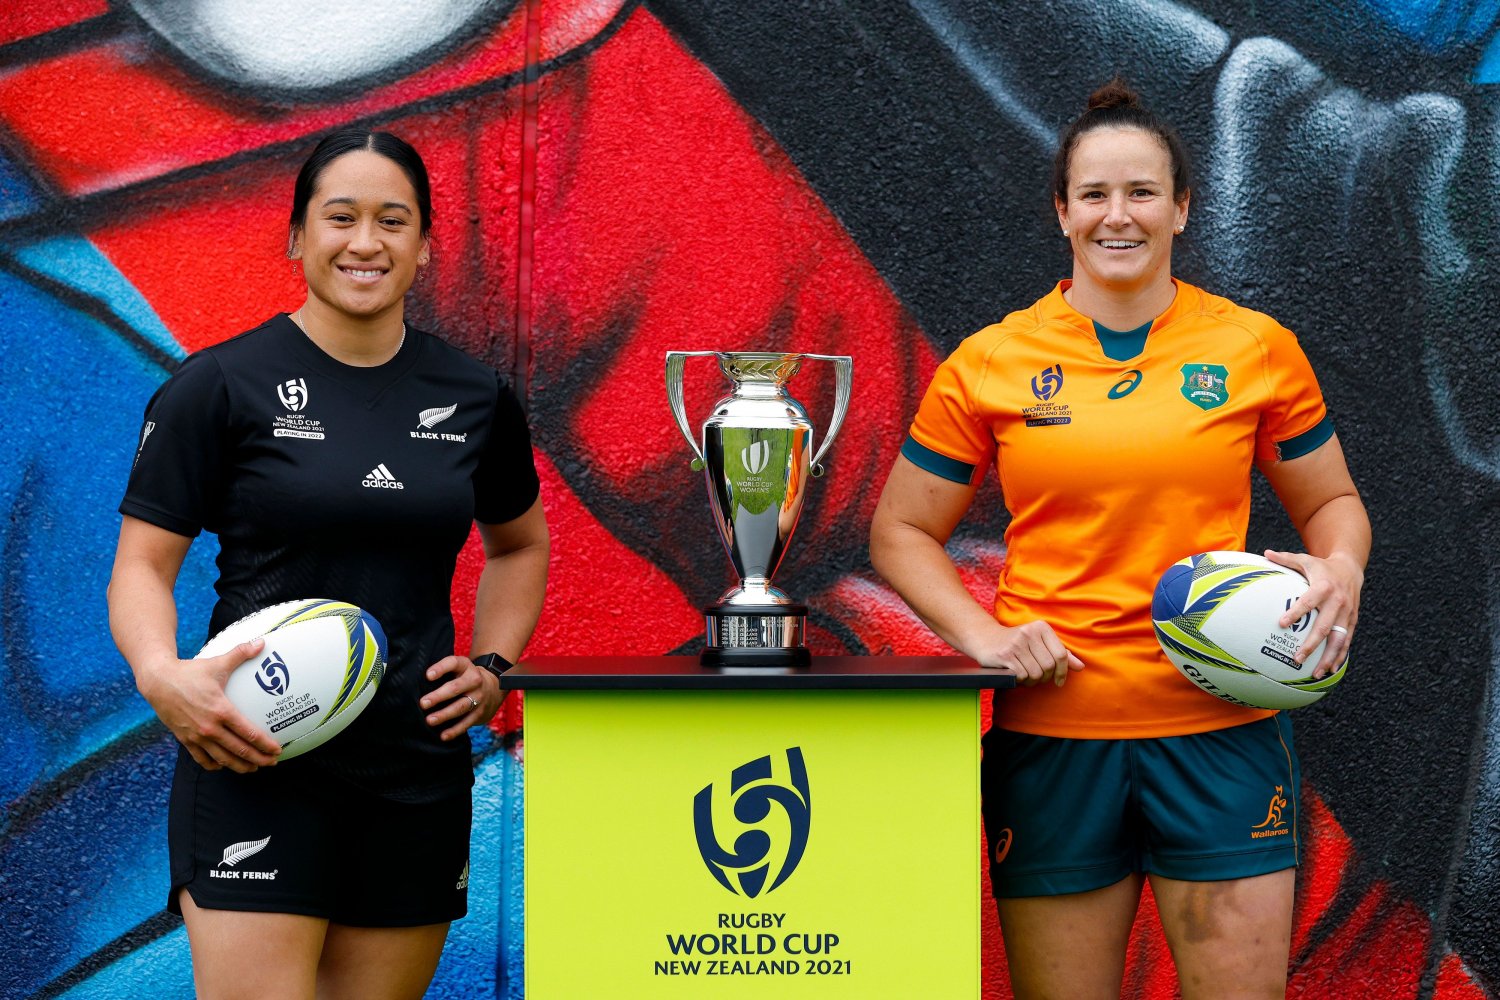 AUSTRALIA V NEW ZEALAND - 2021 RUGBY WORLD CUP IN NEW ZEALAND